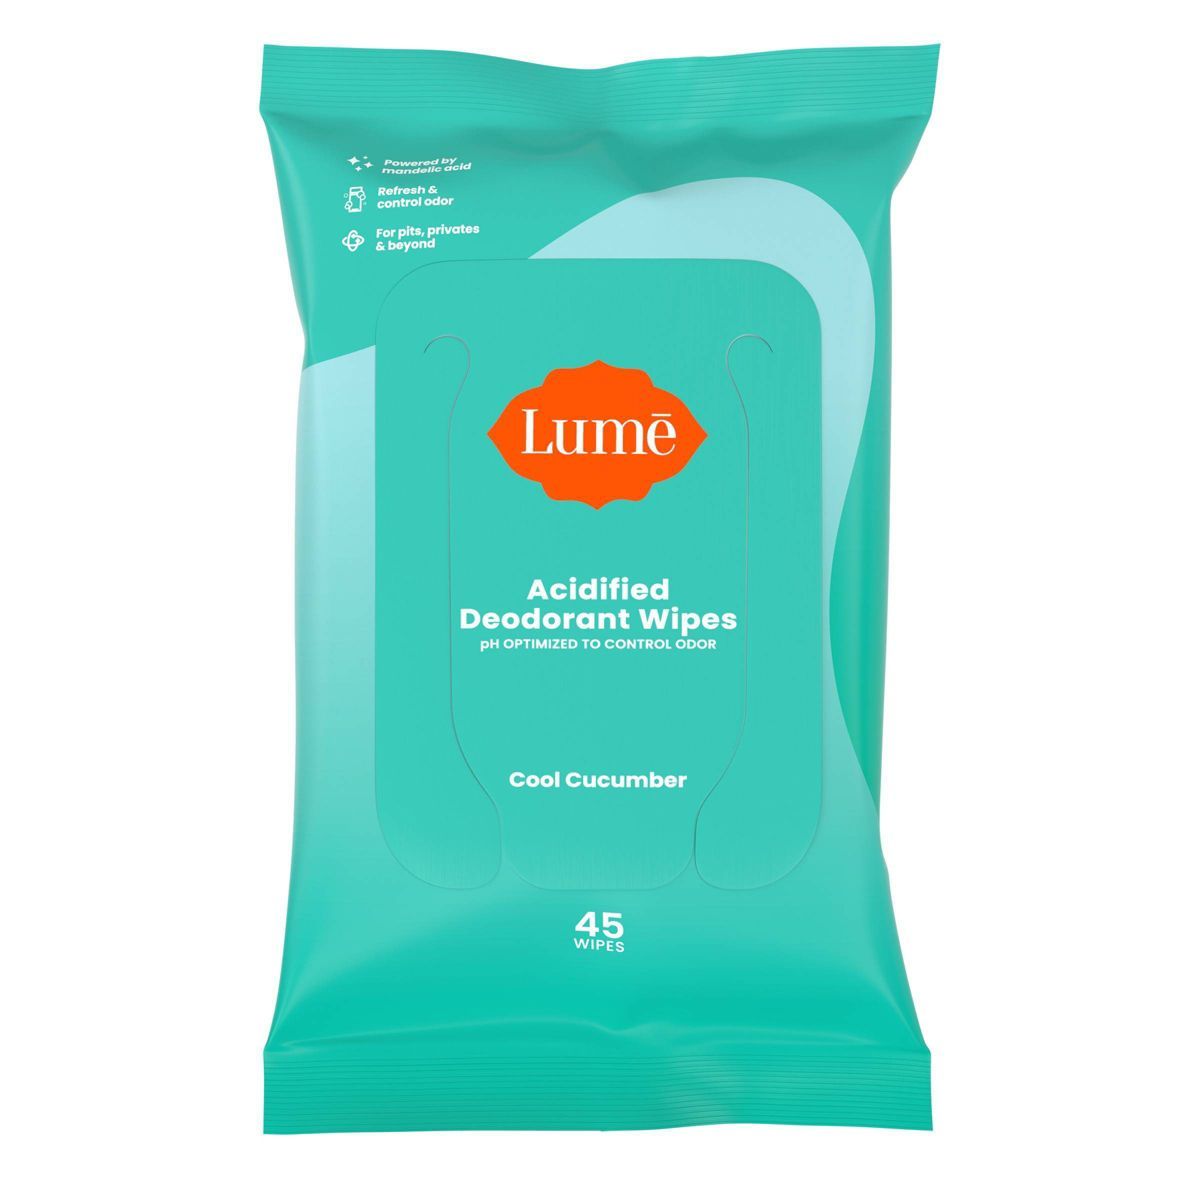 Lume Acidified Deo Wipes Pouch - Cucumber - 45ct | Target